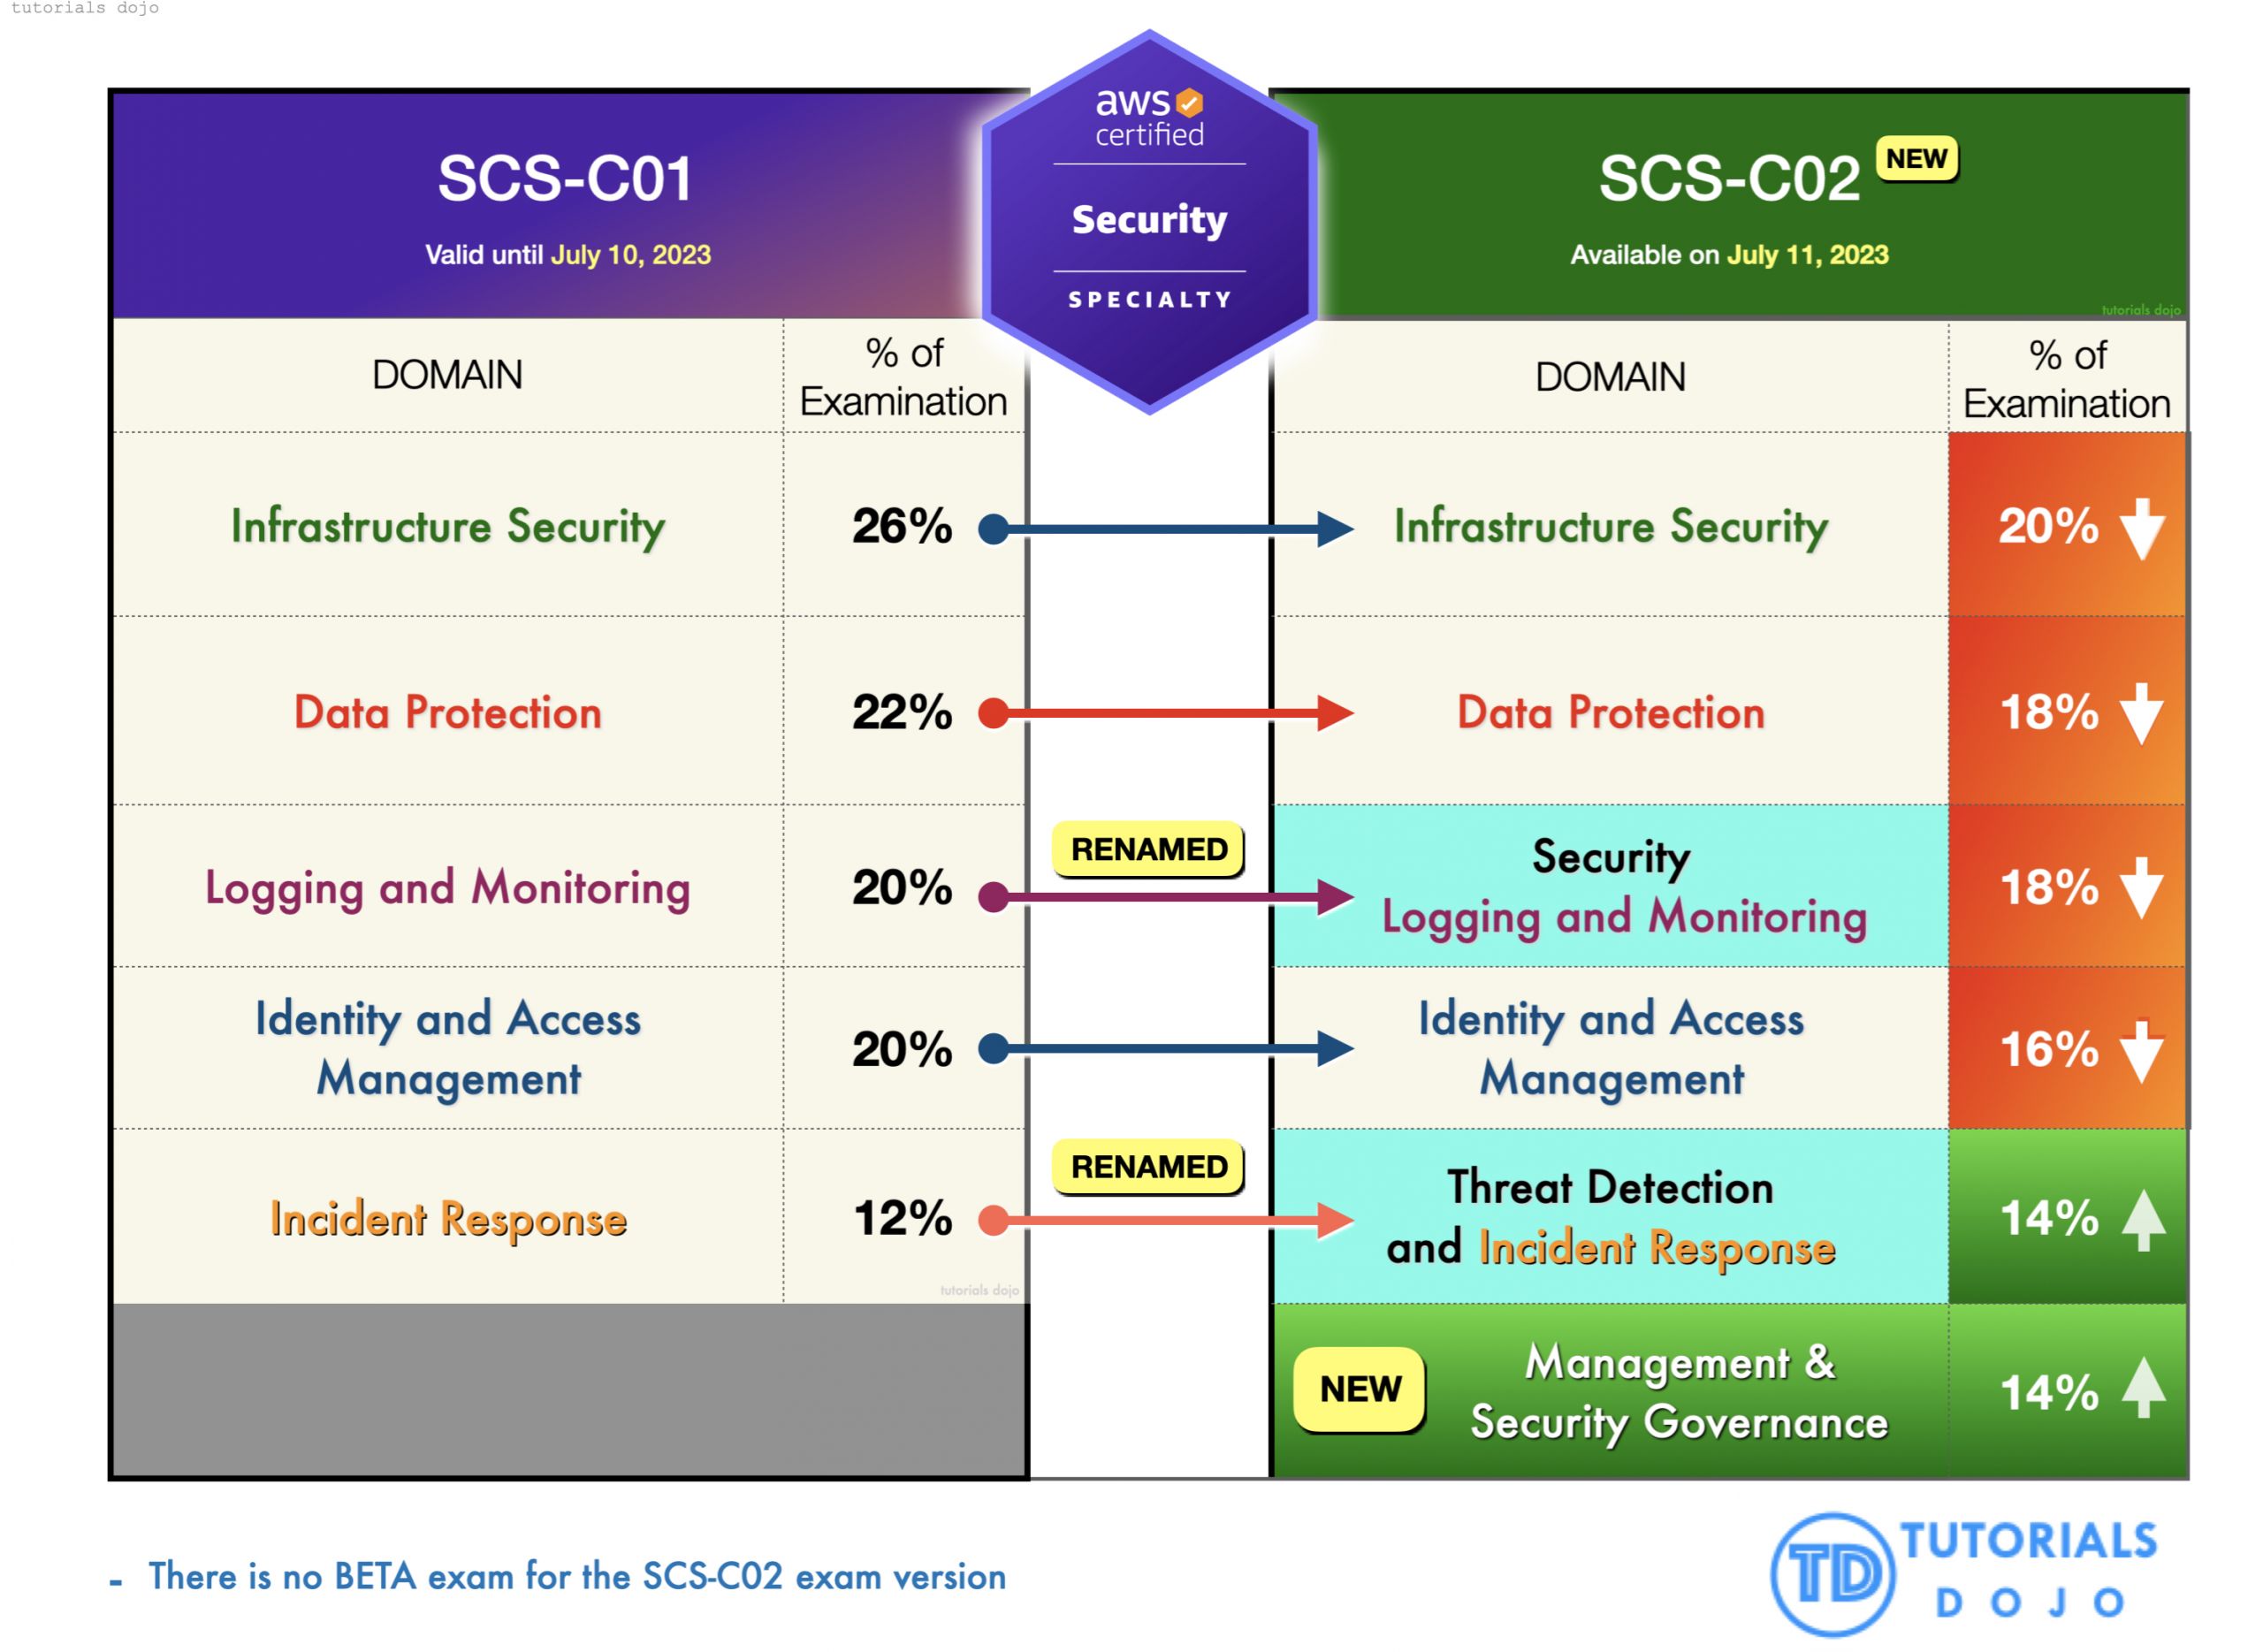 New AWS Certified Security Specialty SCS-C02 Exam 2023